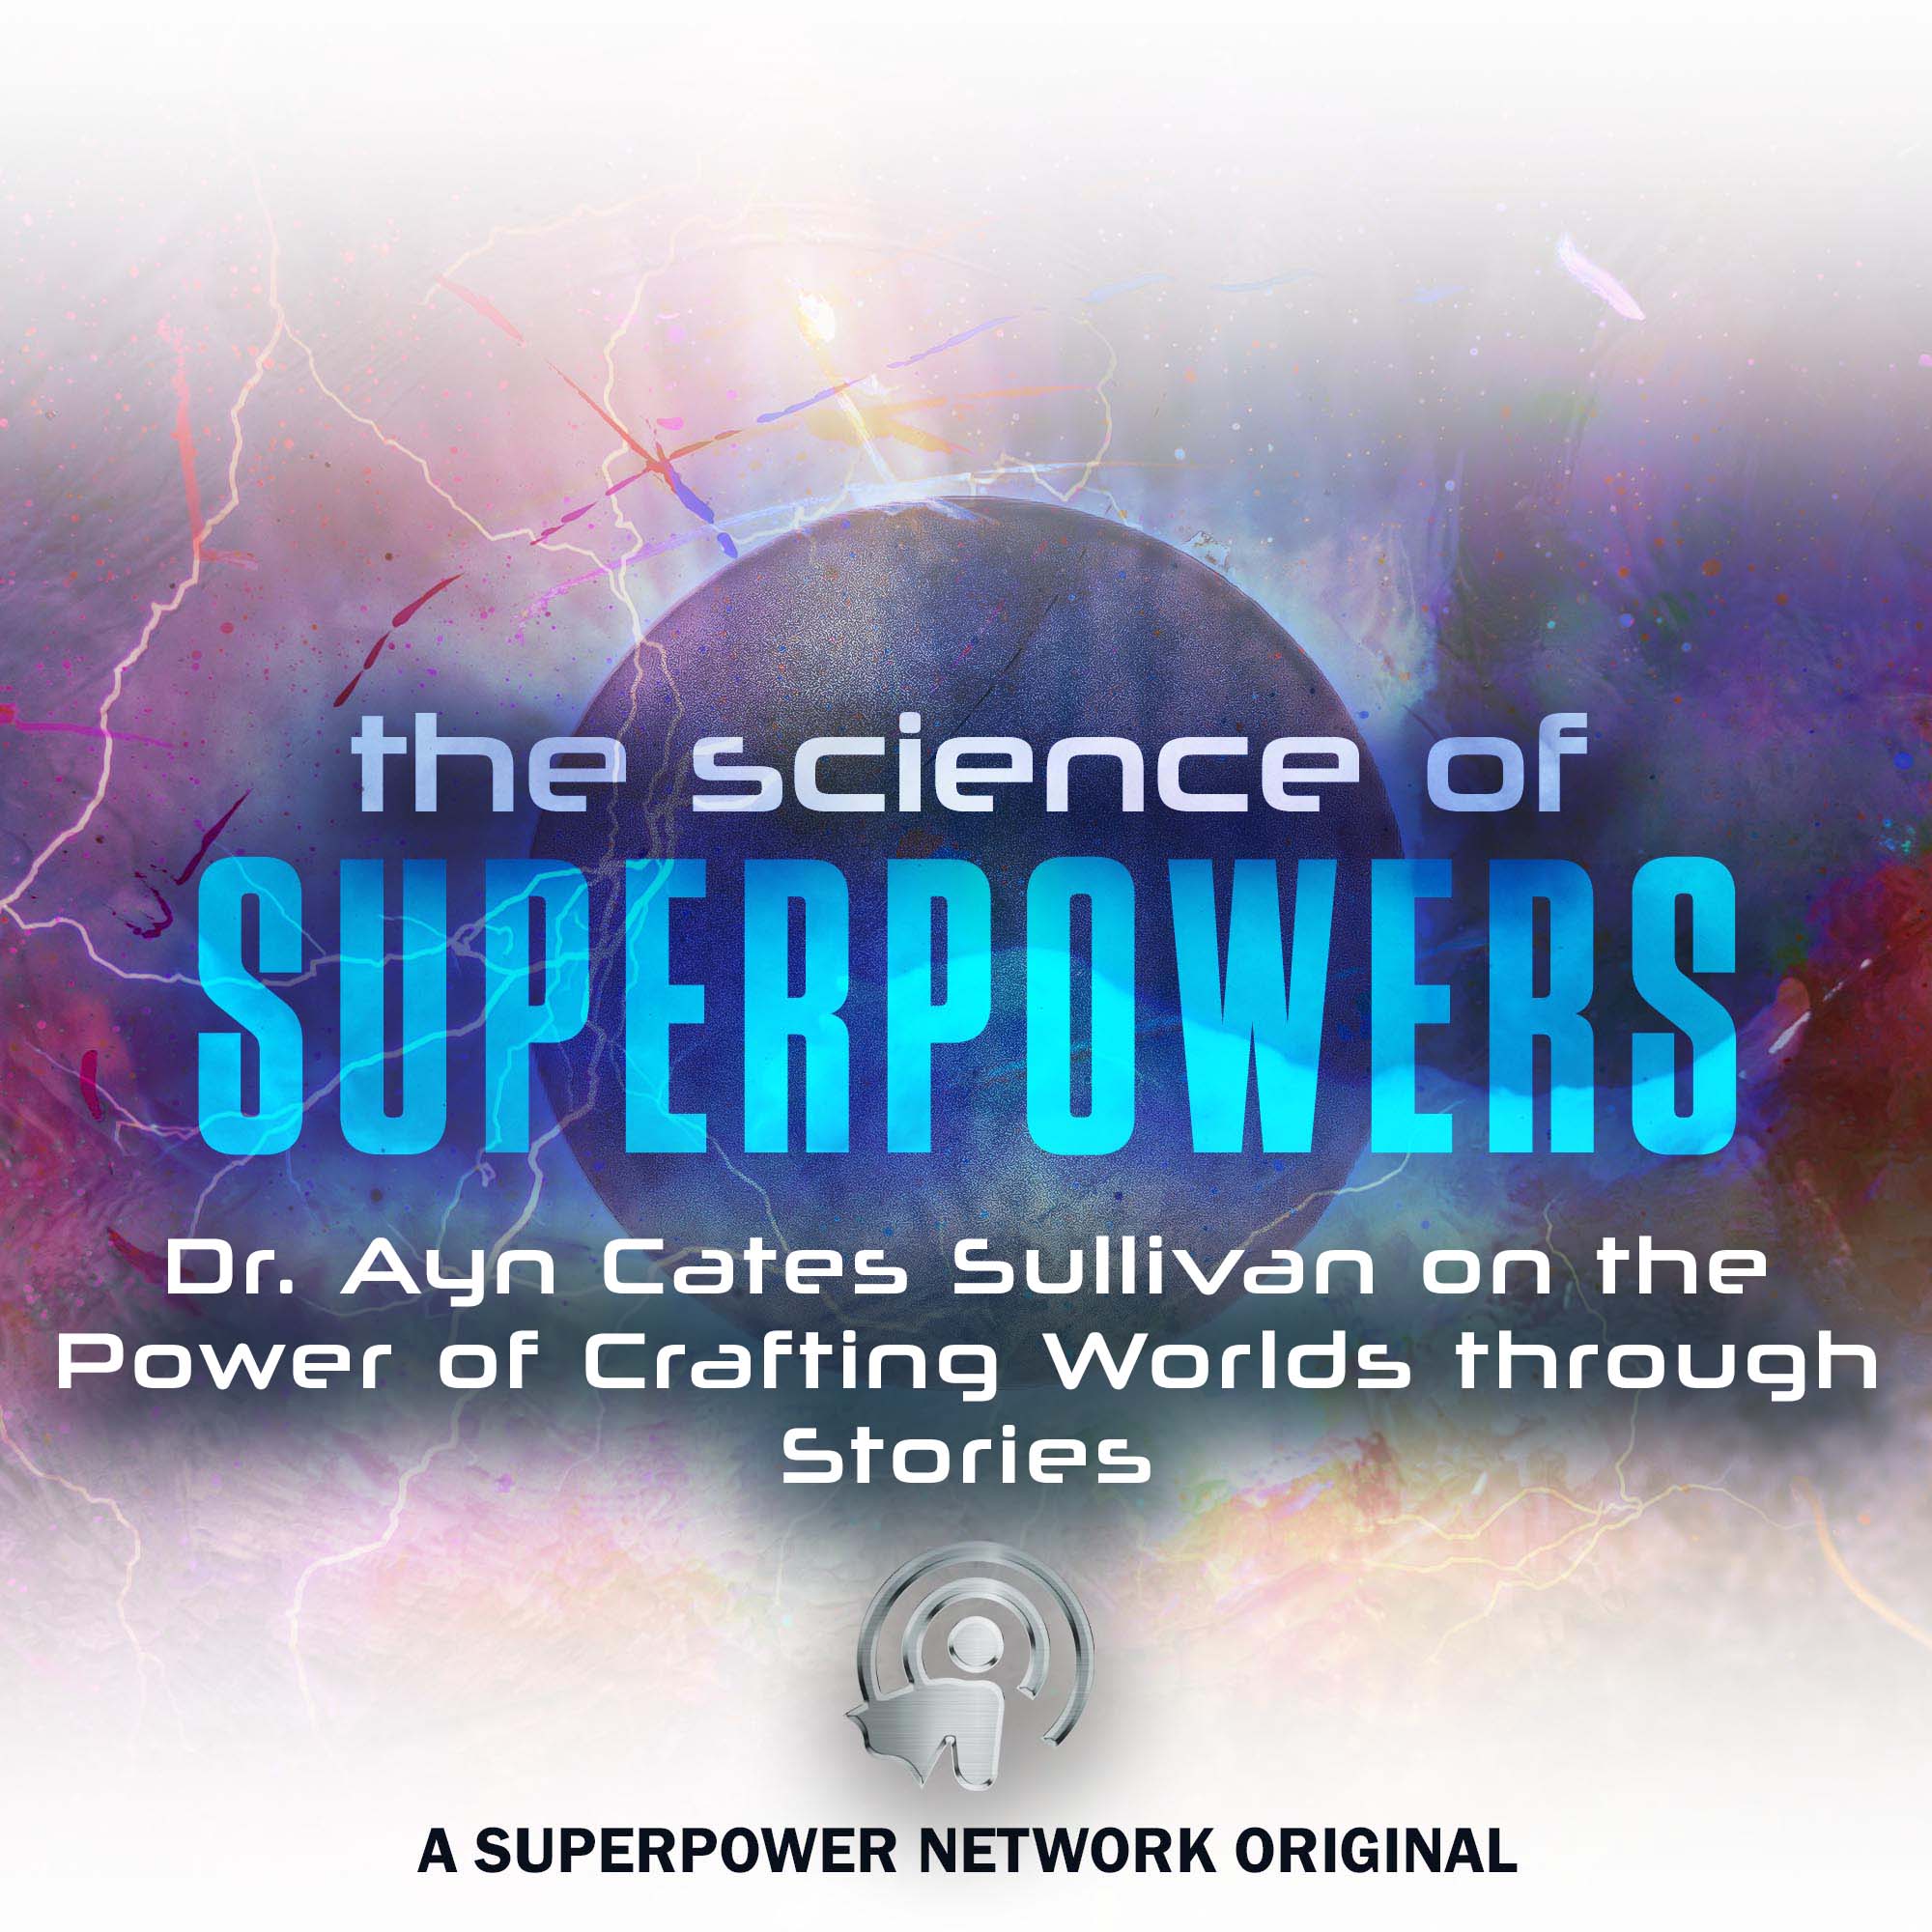 The Science of Superpowers, SOS. Dr. Ayn Cates Sullivan on the Power of Crafting Worlds through Stories, Master Your Personal Power #SOS #MasterYourPersonalPower #superpowers #Superpowerexperts #SuperPowerNetwork